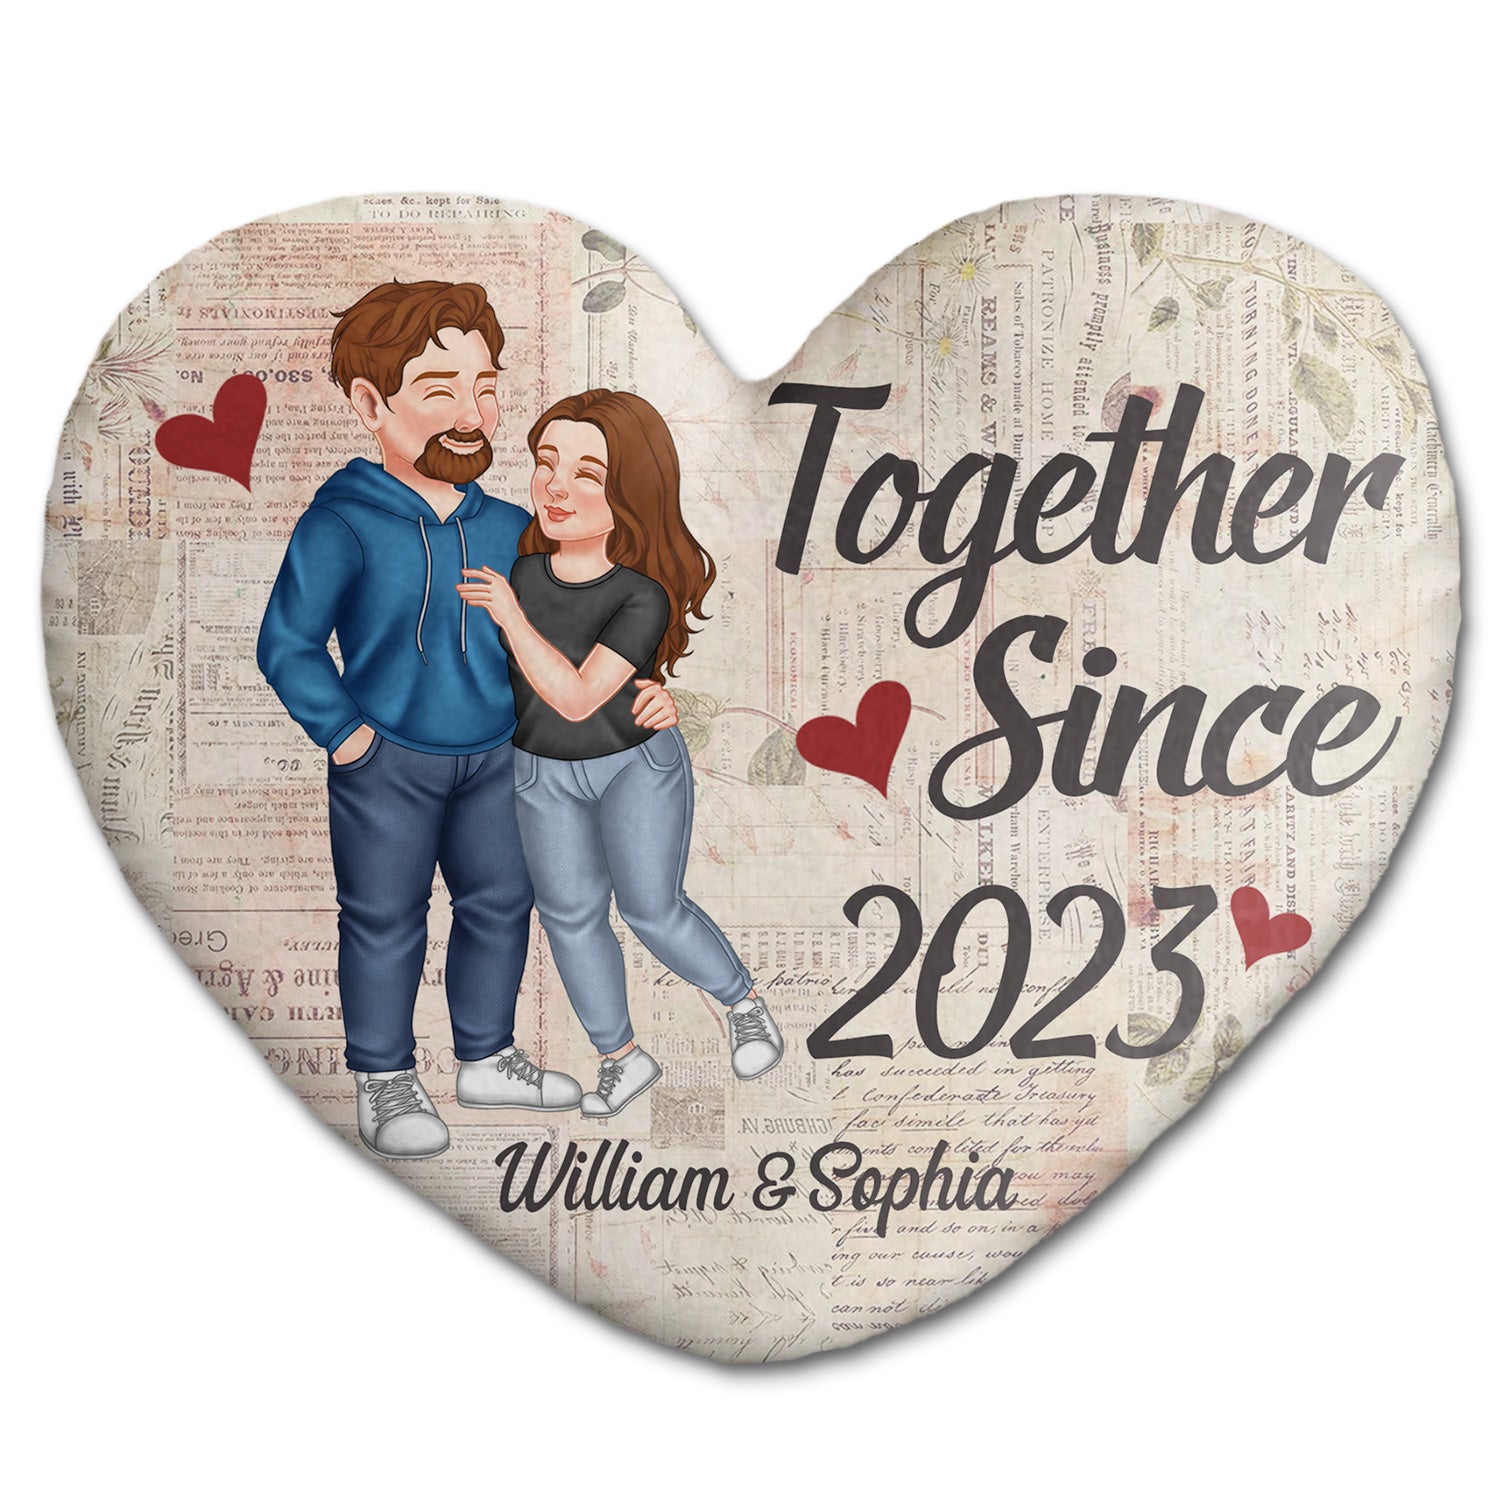 Together Since Arm In Arm - Loving, Anniversary Gift For Couples, Husband, Wife - Personalized Heart Shaped Pillow